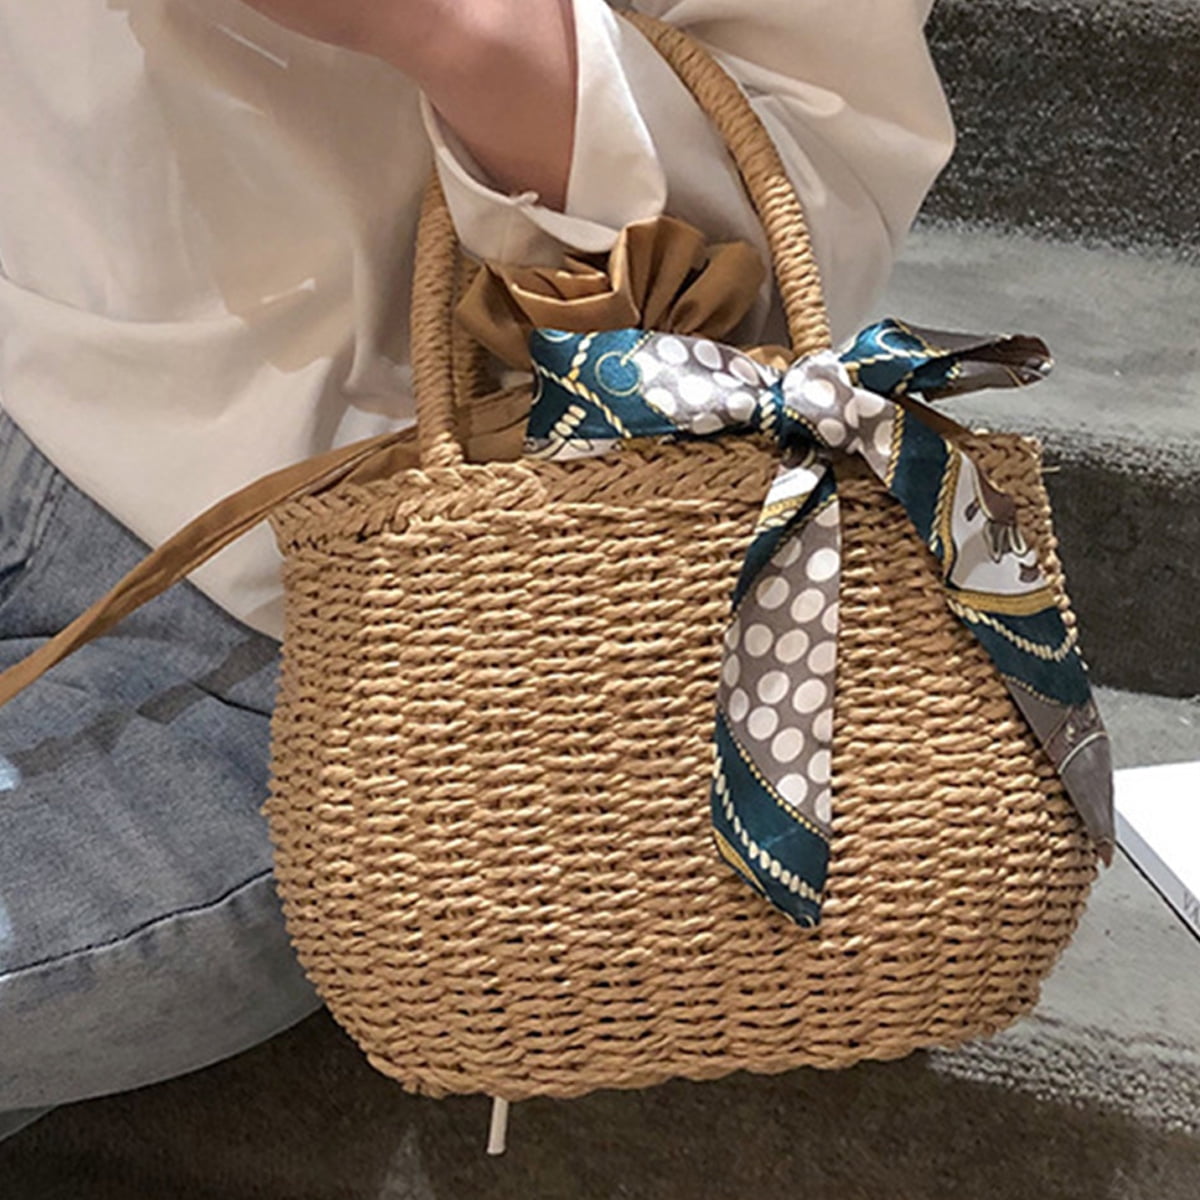 Straw Bag Hand-Woven Women Straw Bag Ladies Small Shoulder Bags